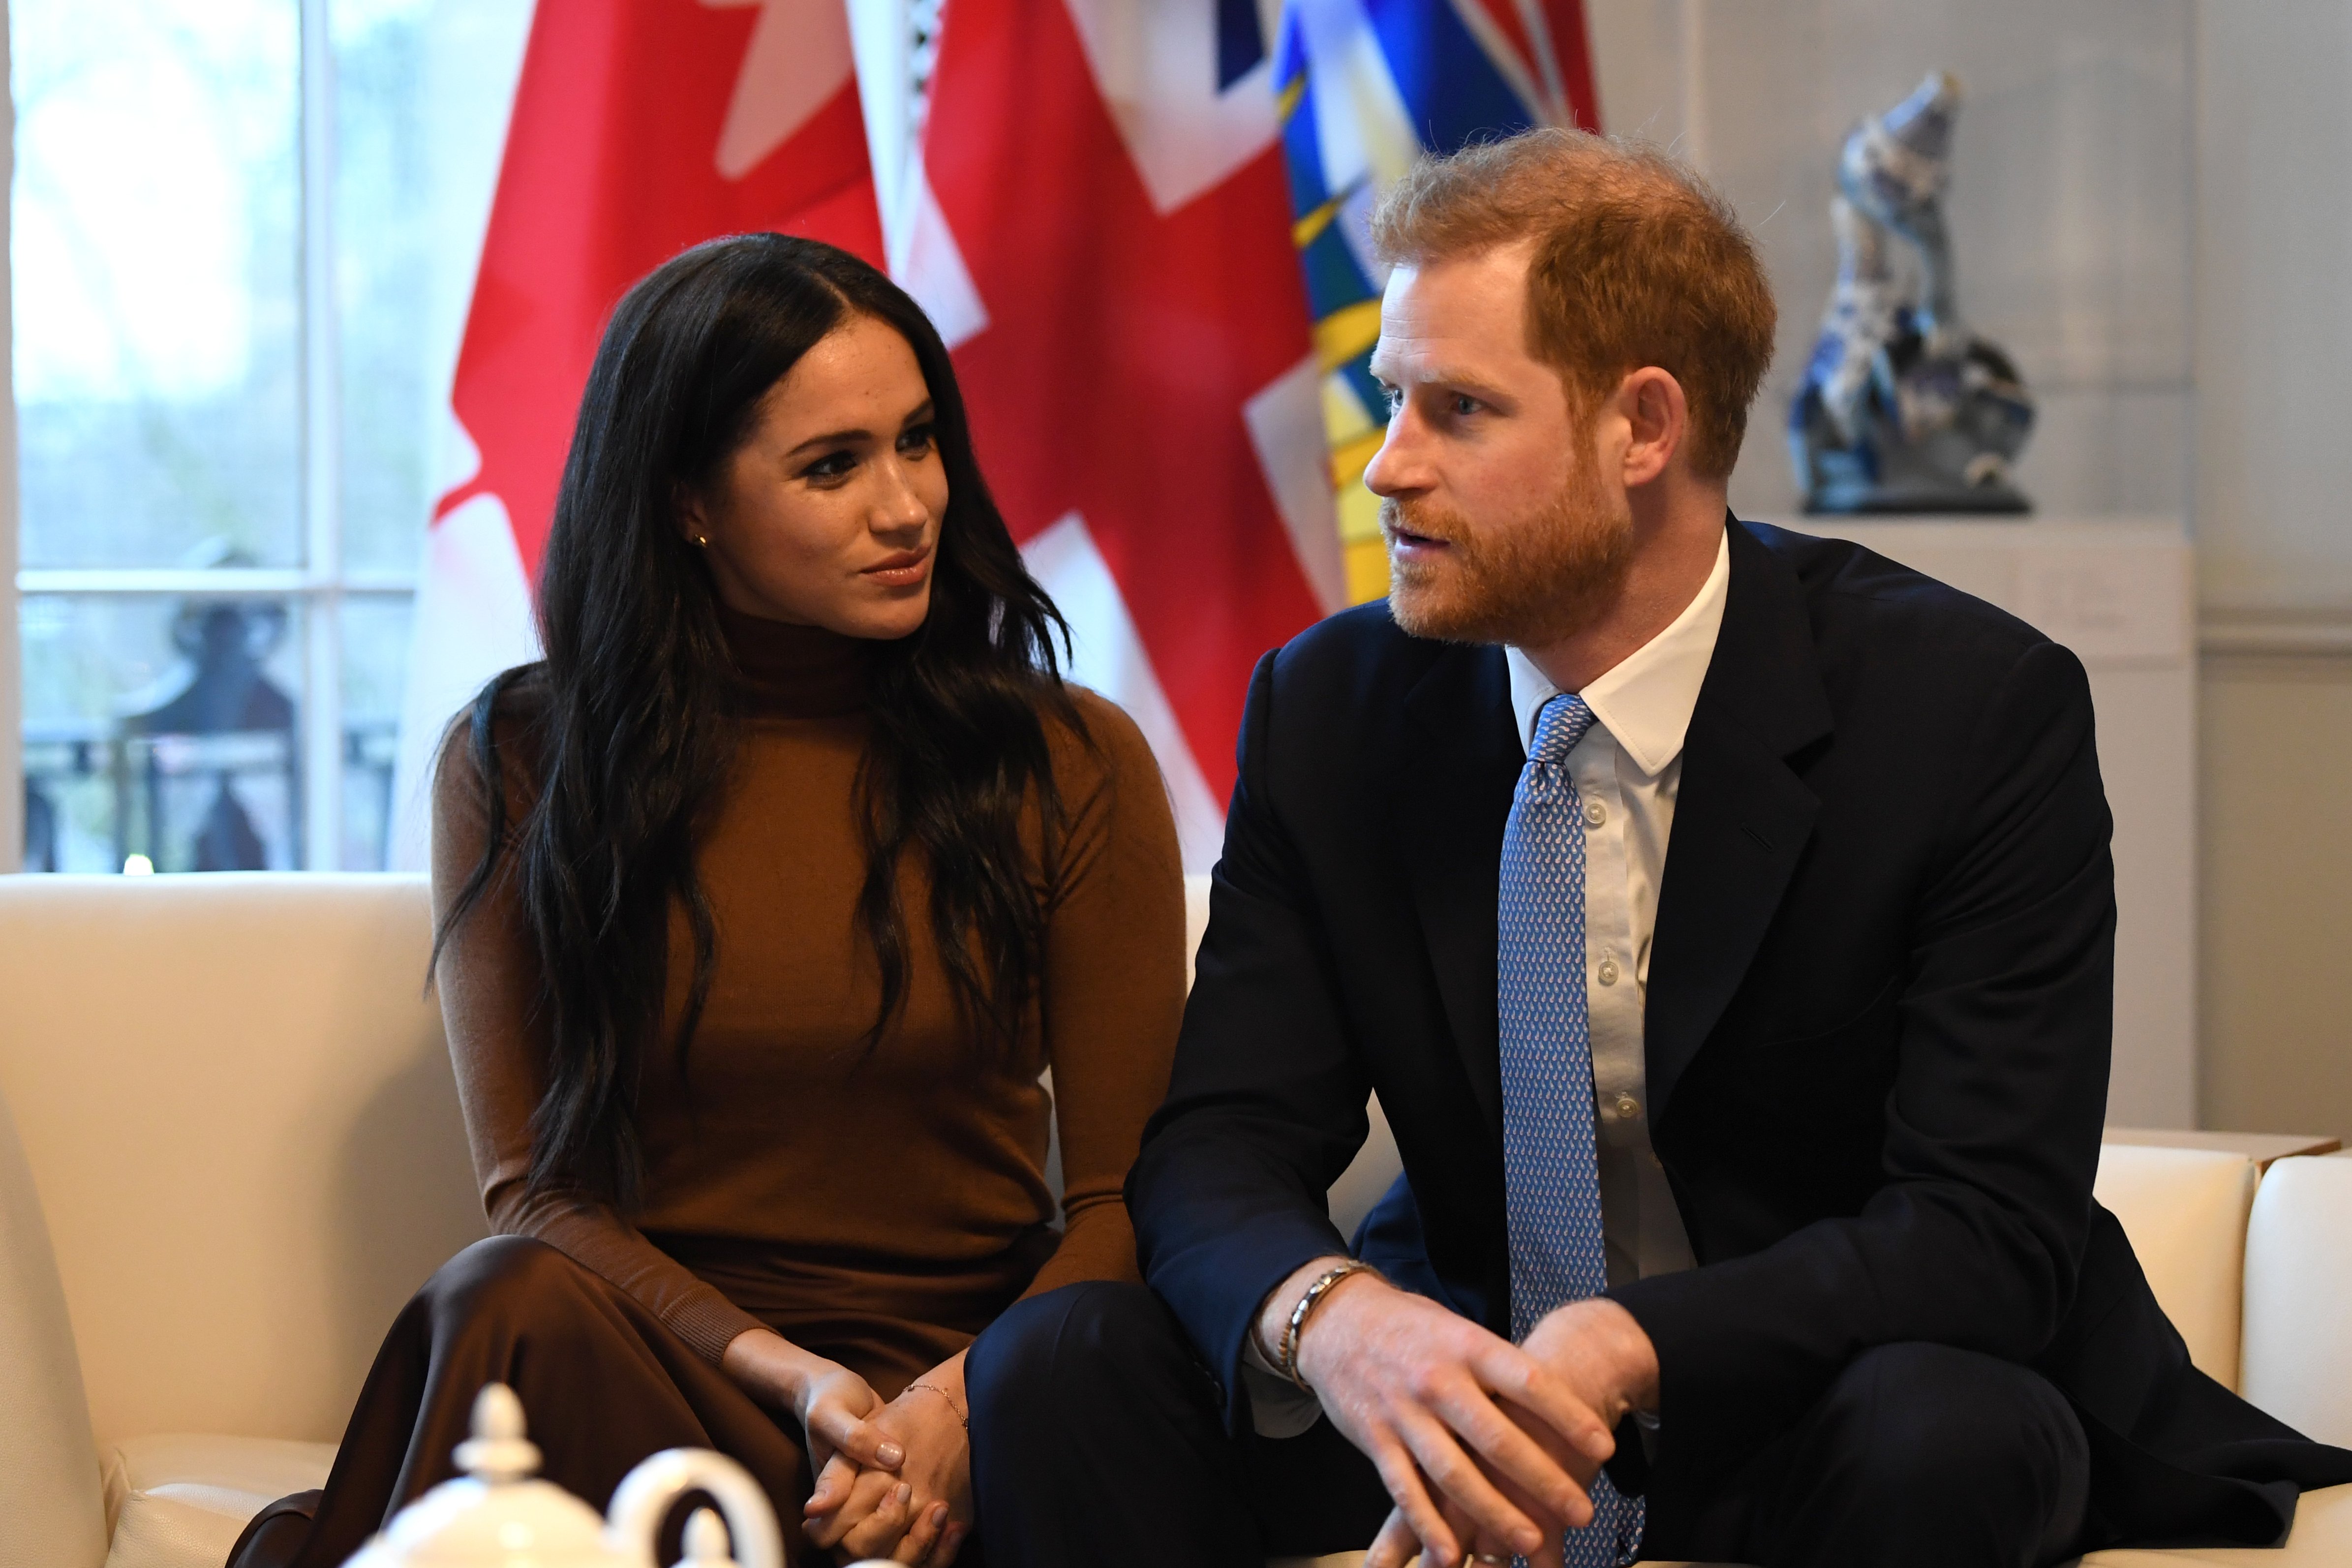 Prince Harry and Meghan during their visit to Canada House in London, England on January 7, 2020. | Source: Getty Images.